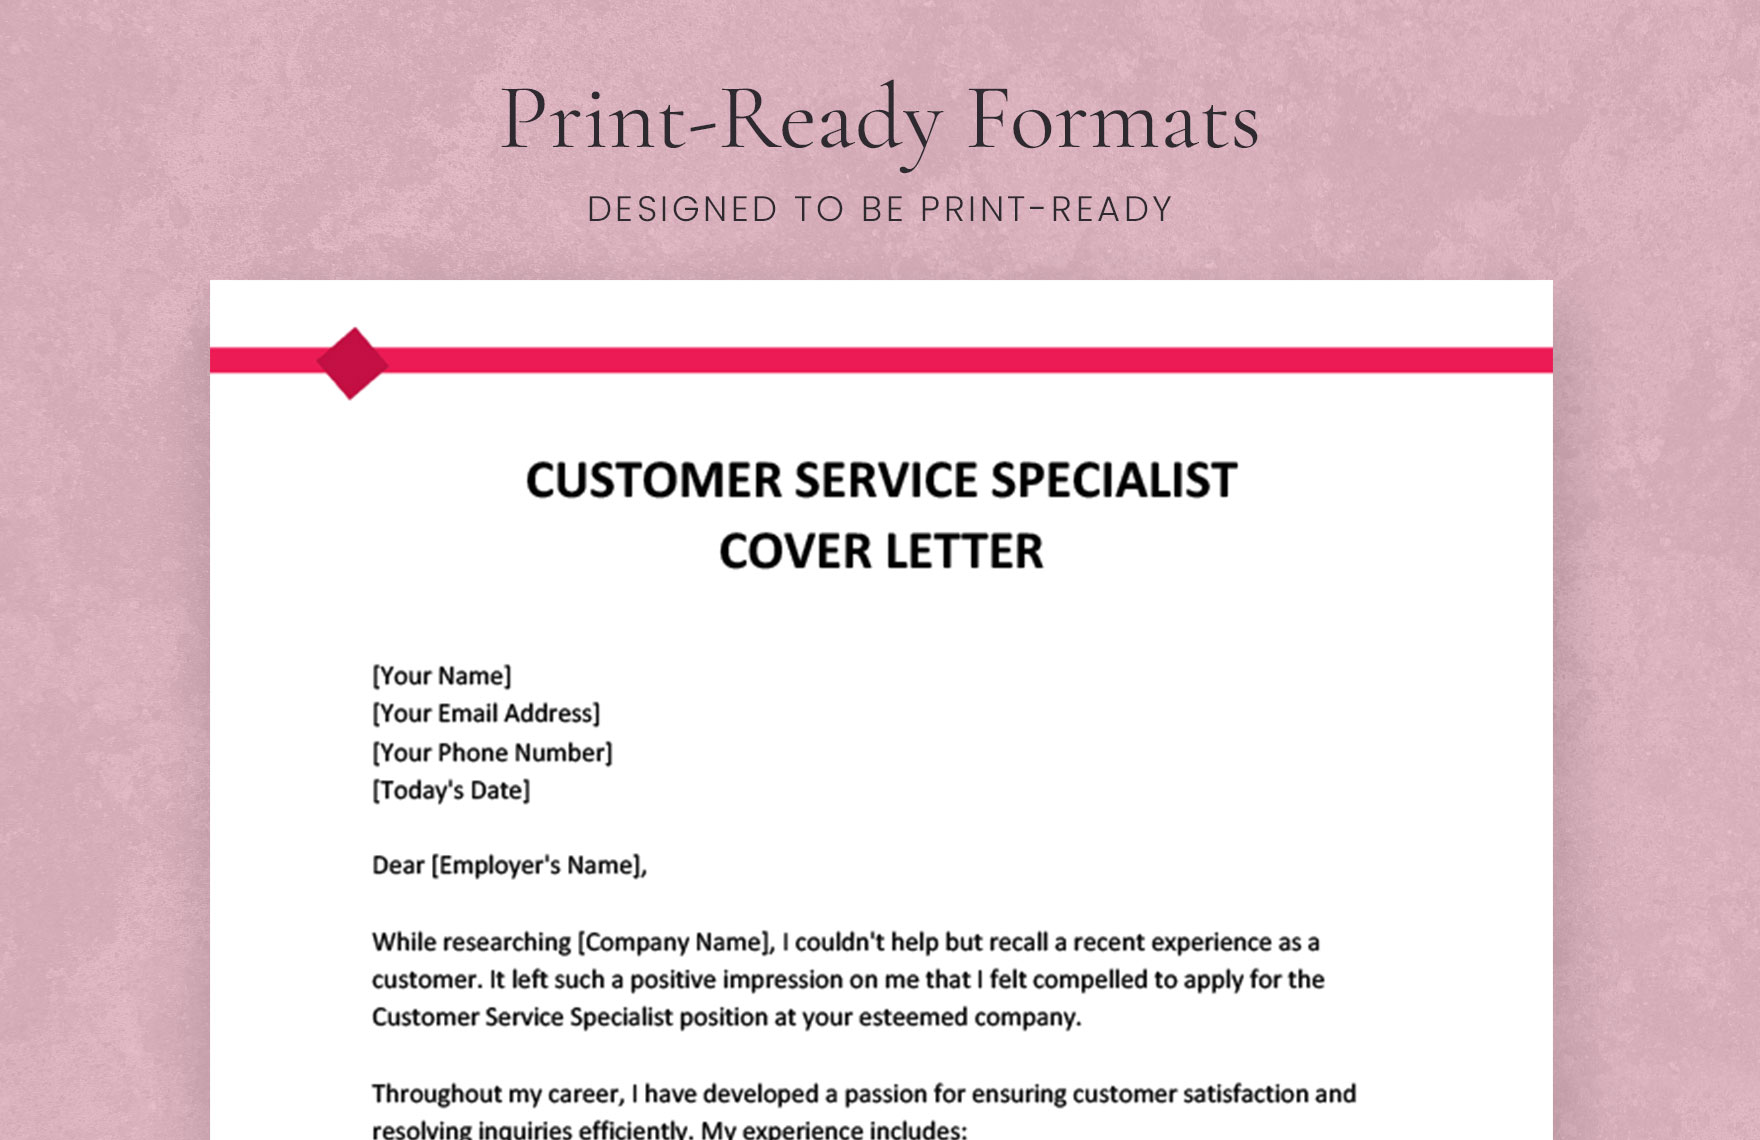 Customer Service Specialist Cover Letter